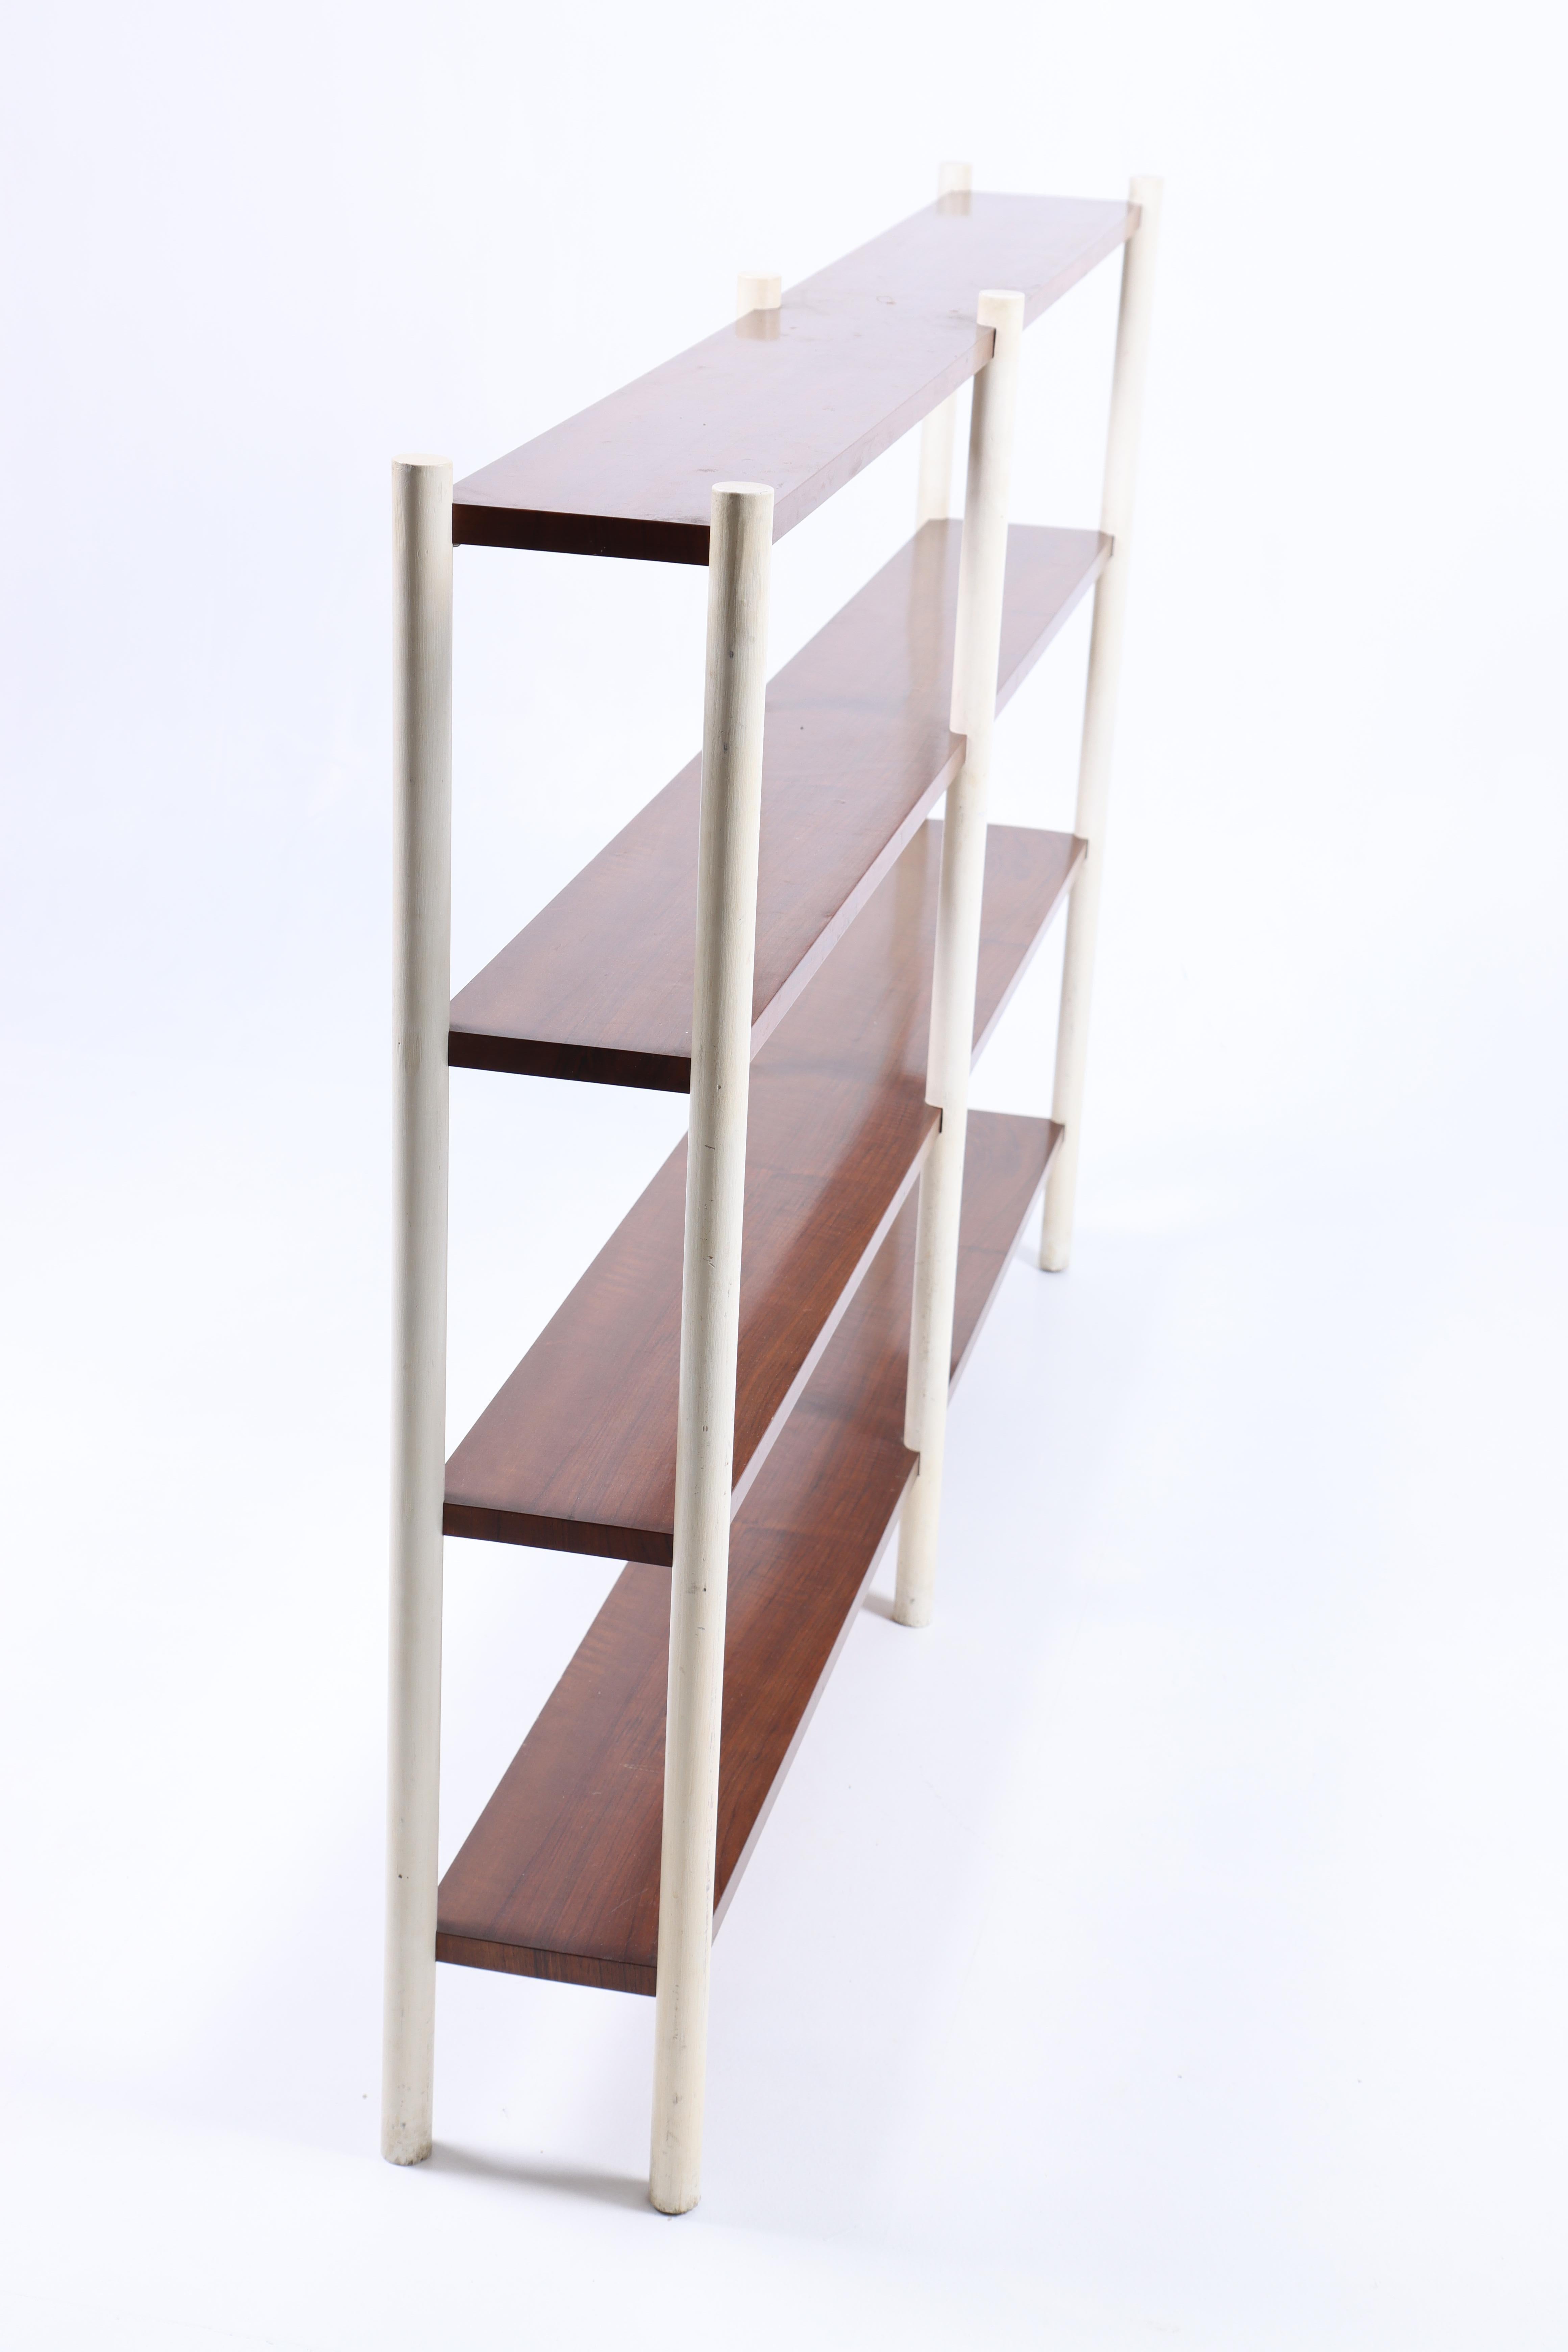 Mid-20th Century Midcentury Bookcase in Walnut, Made in Denmark 1950s For Sale